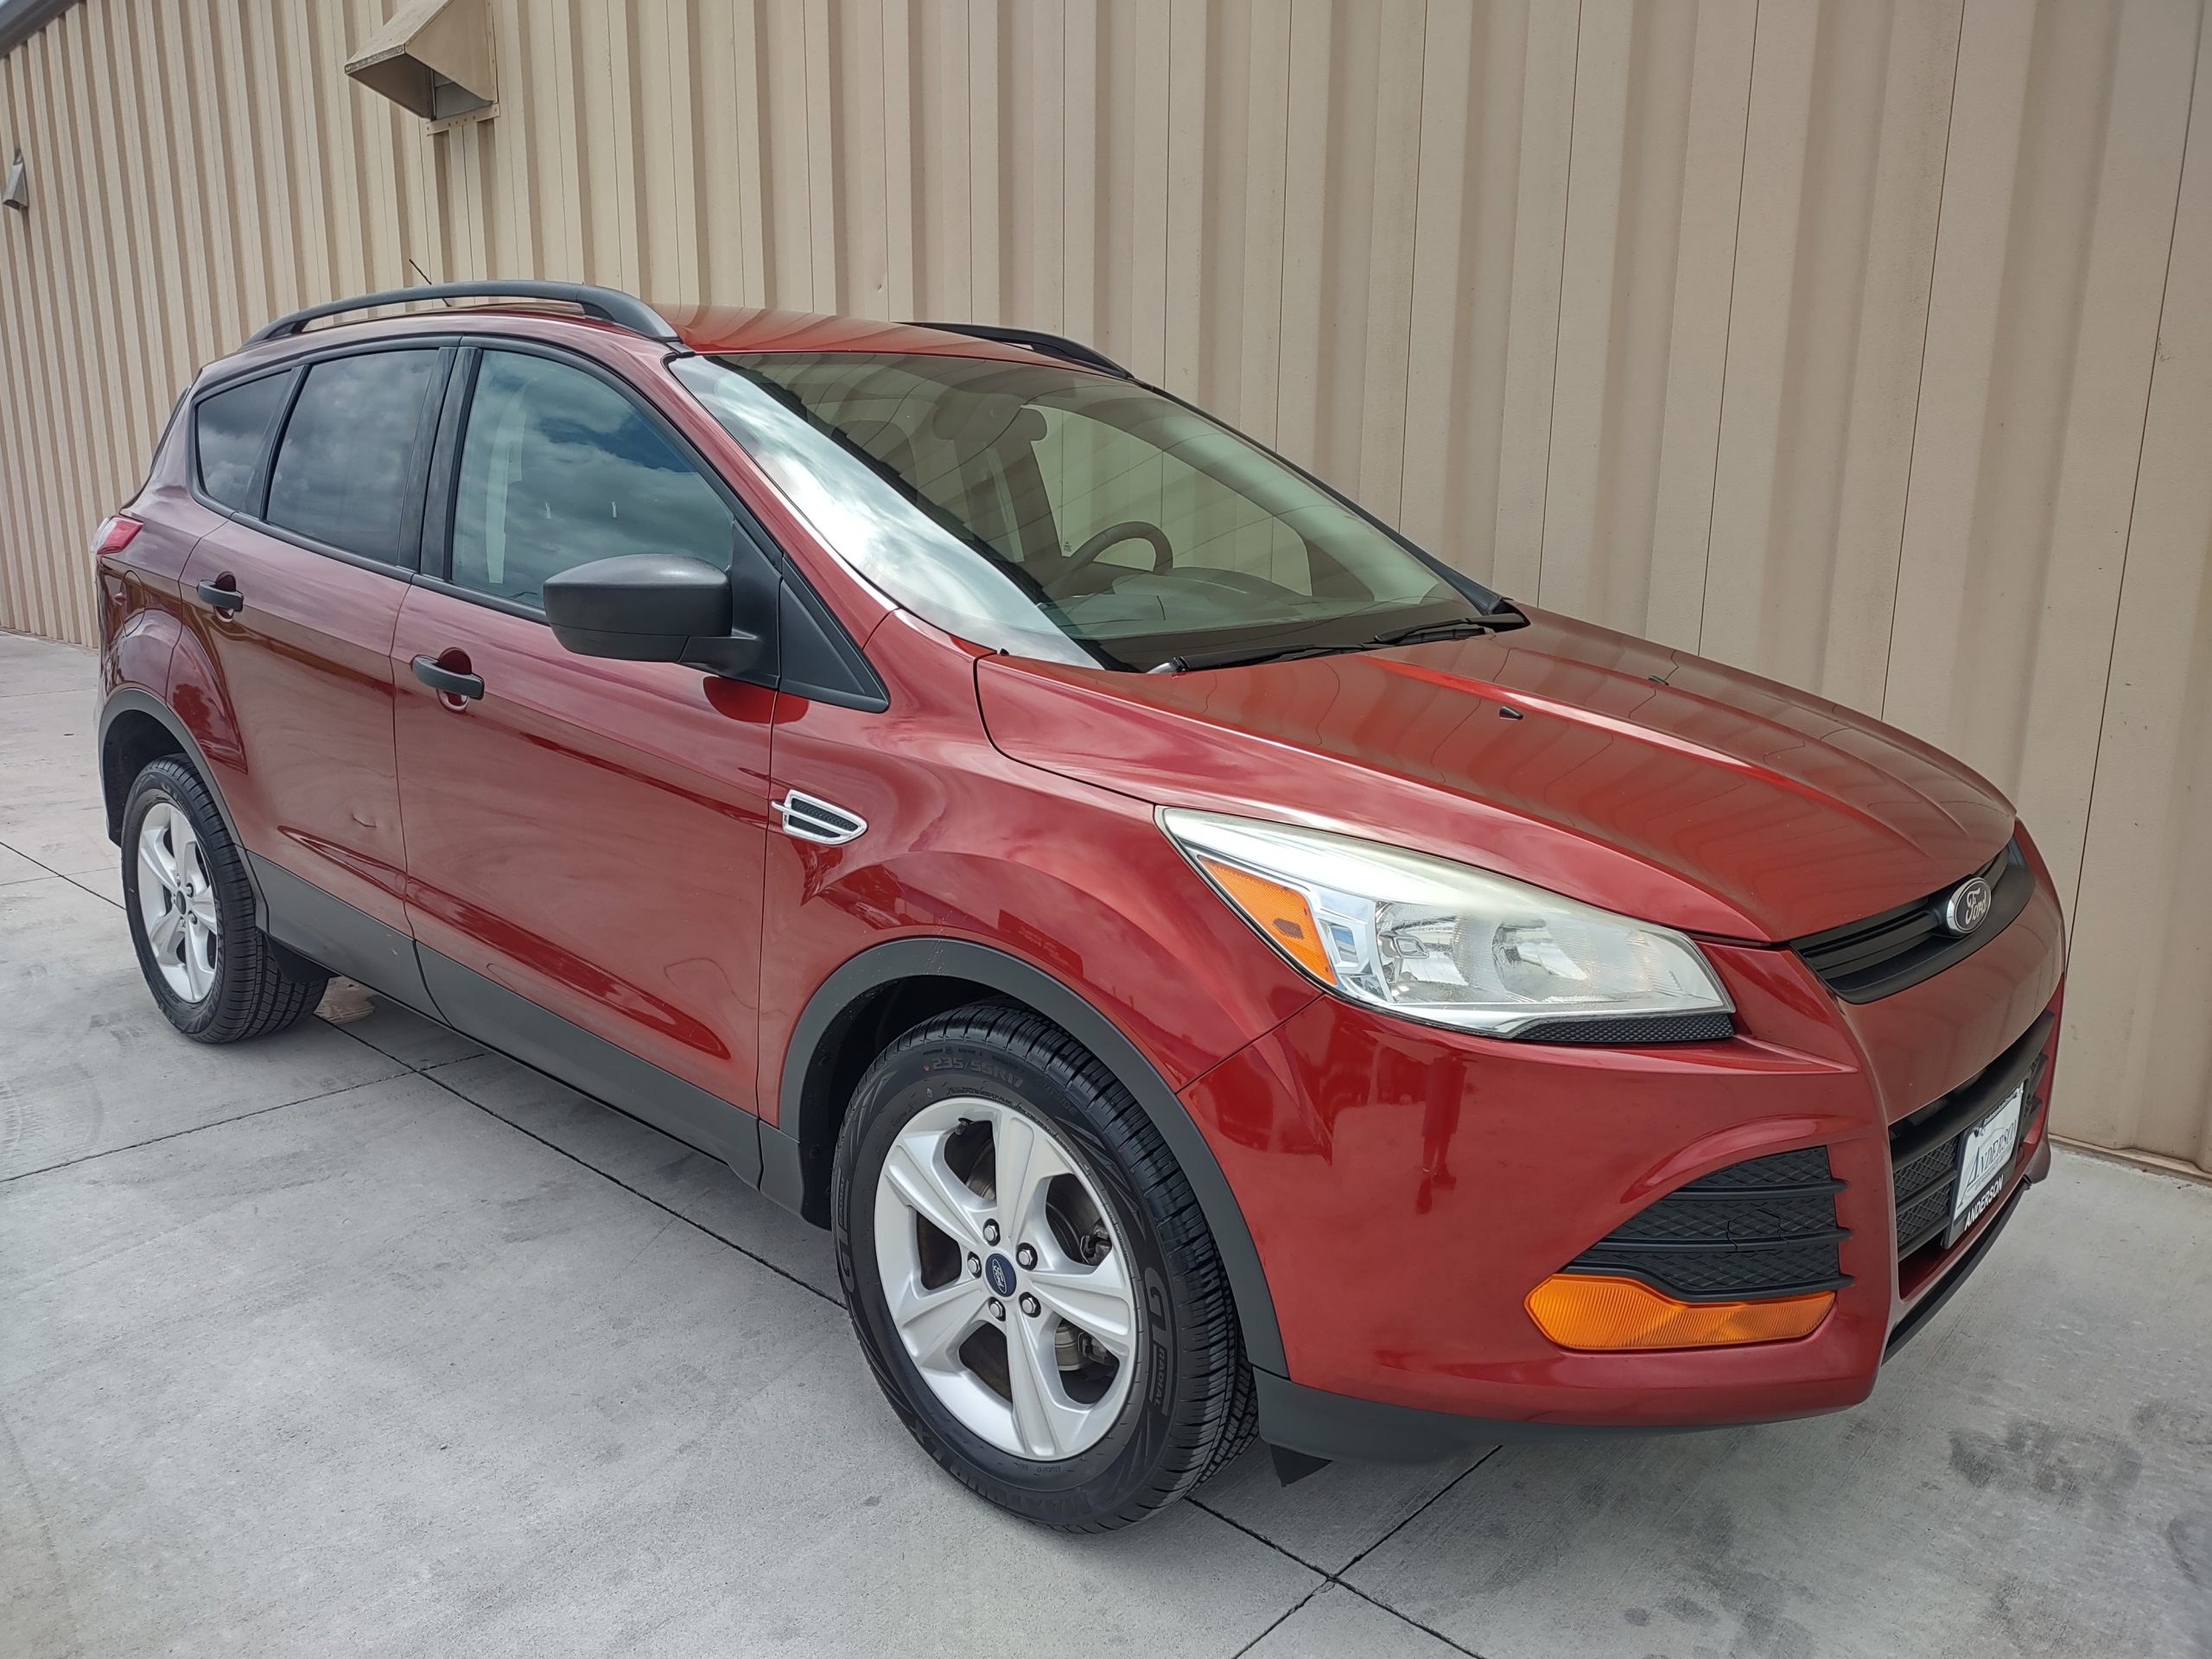 Used 2016 Ford Escape S SUV for sale in 